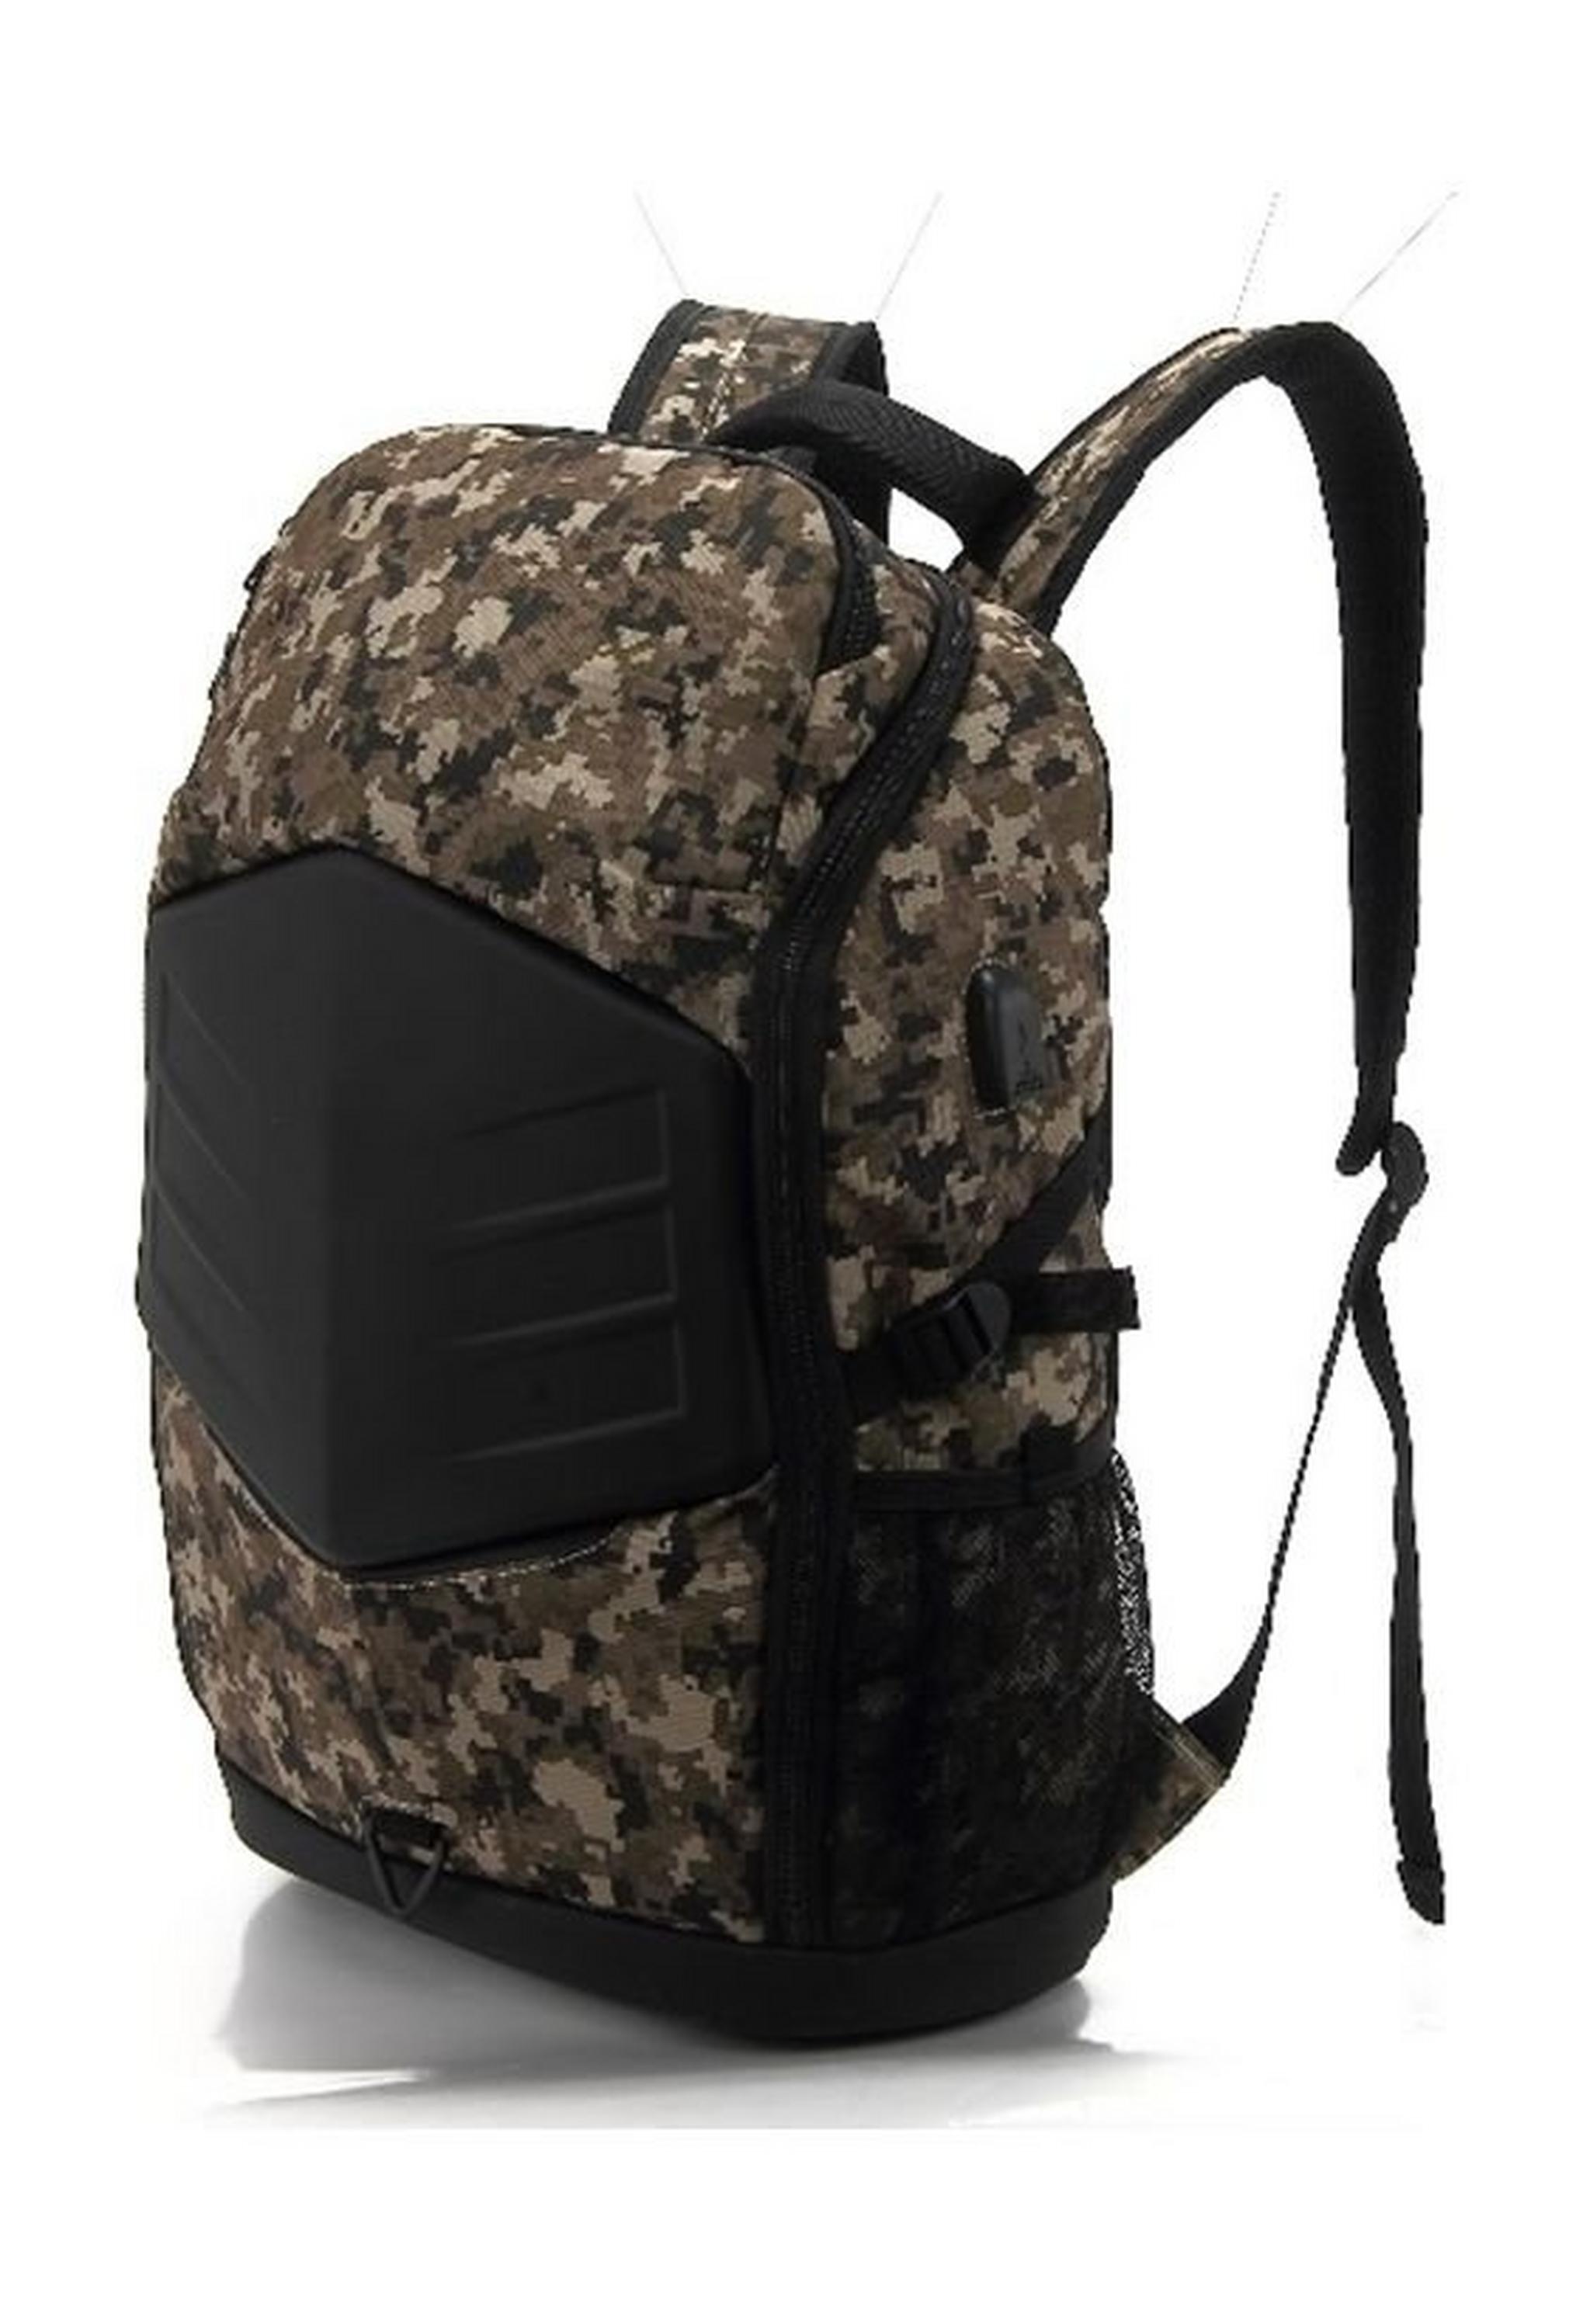 EQ Backpack for up to 17.3-inch Laptop